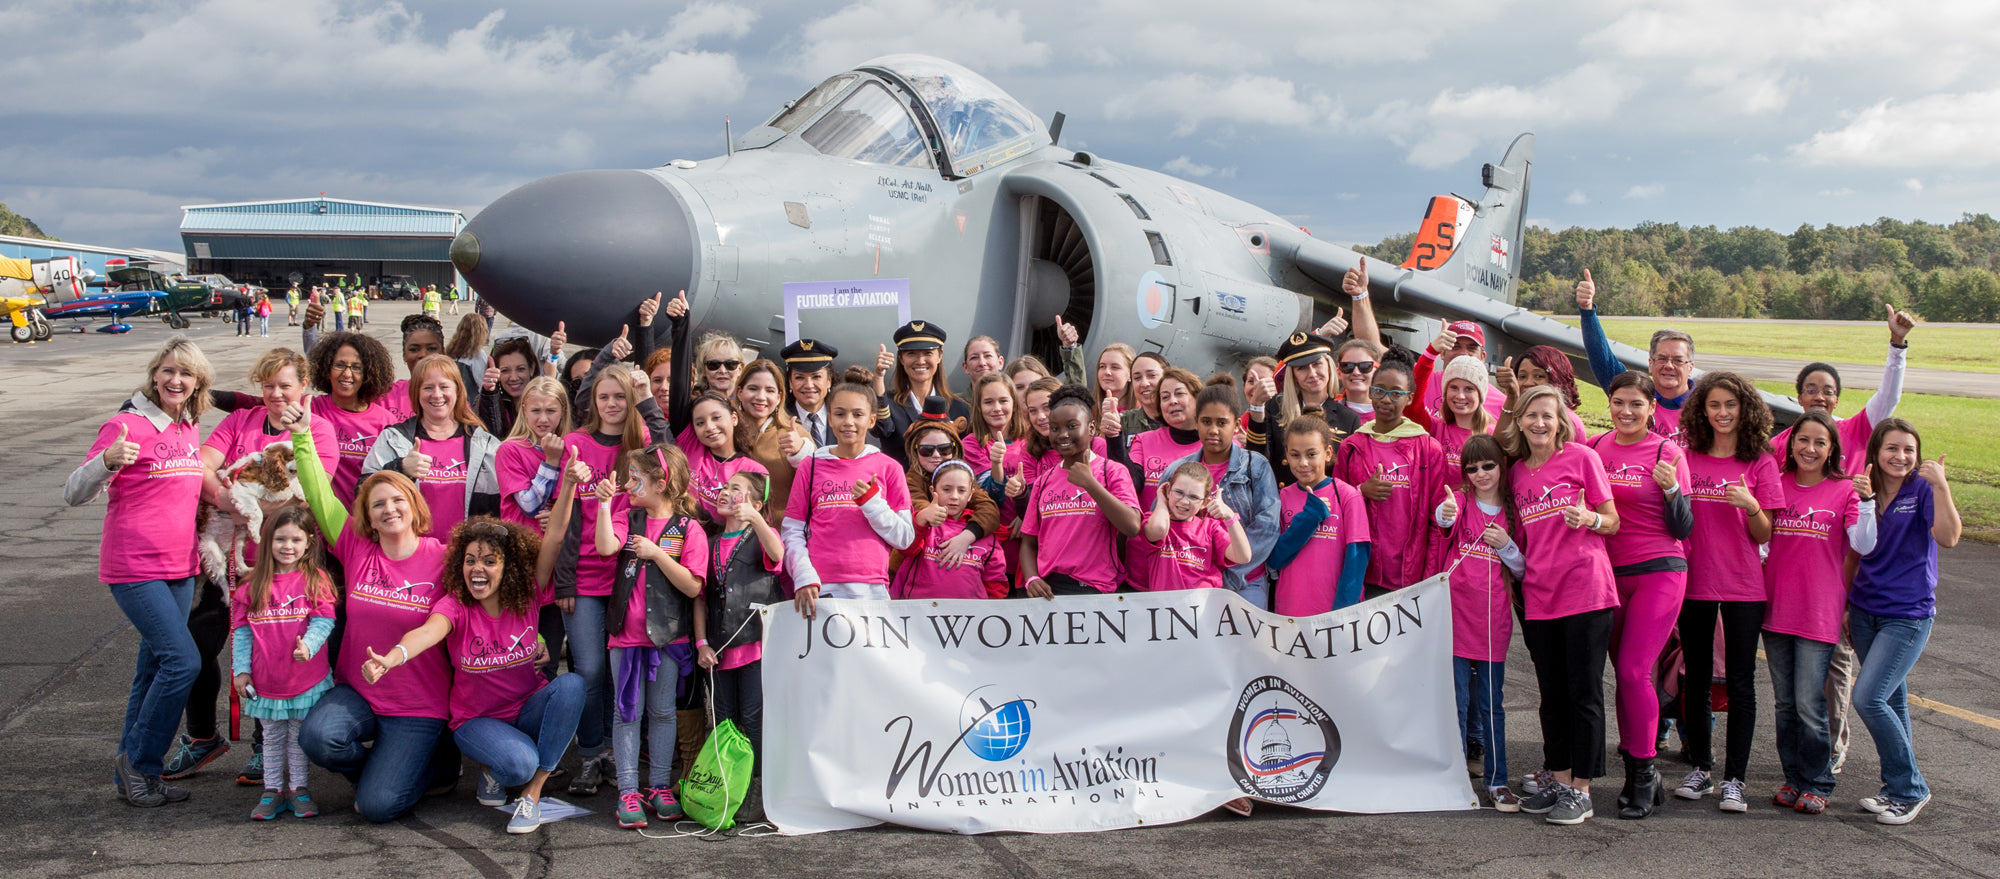 The Sky is the Limit!  Women in Aviation International